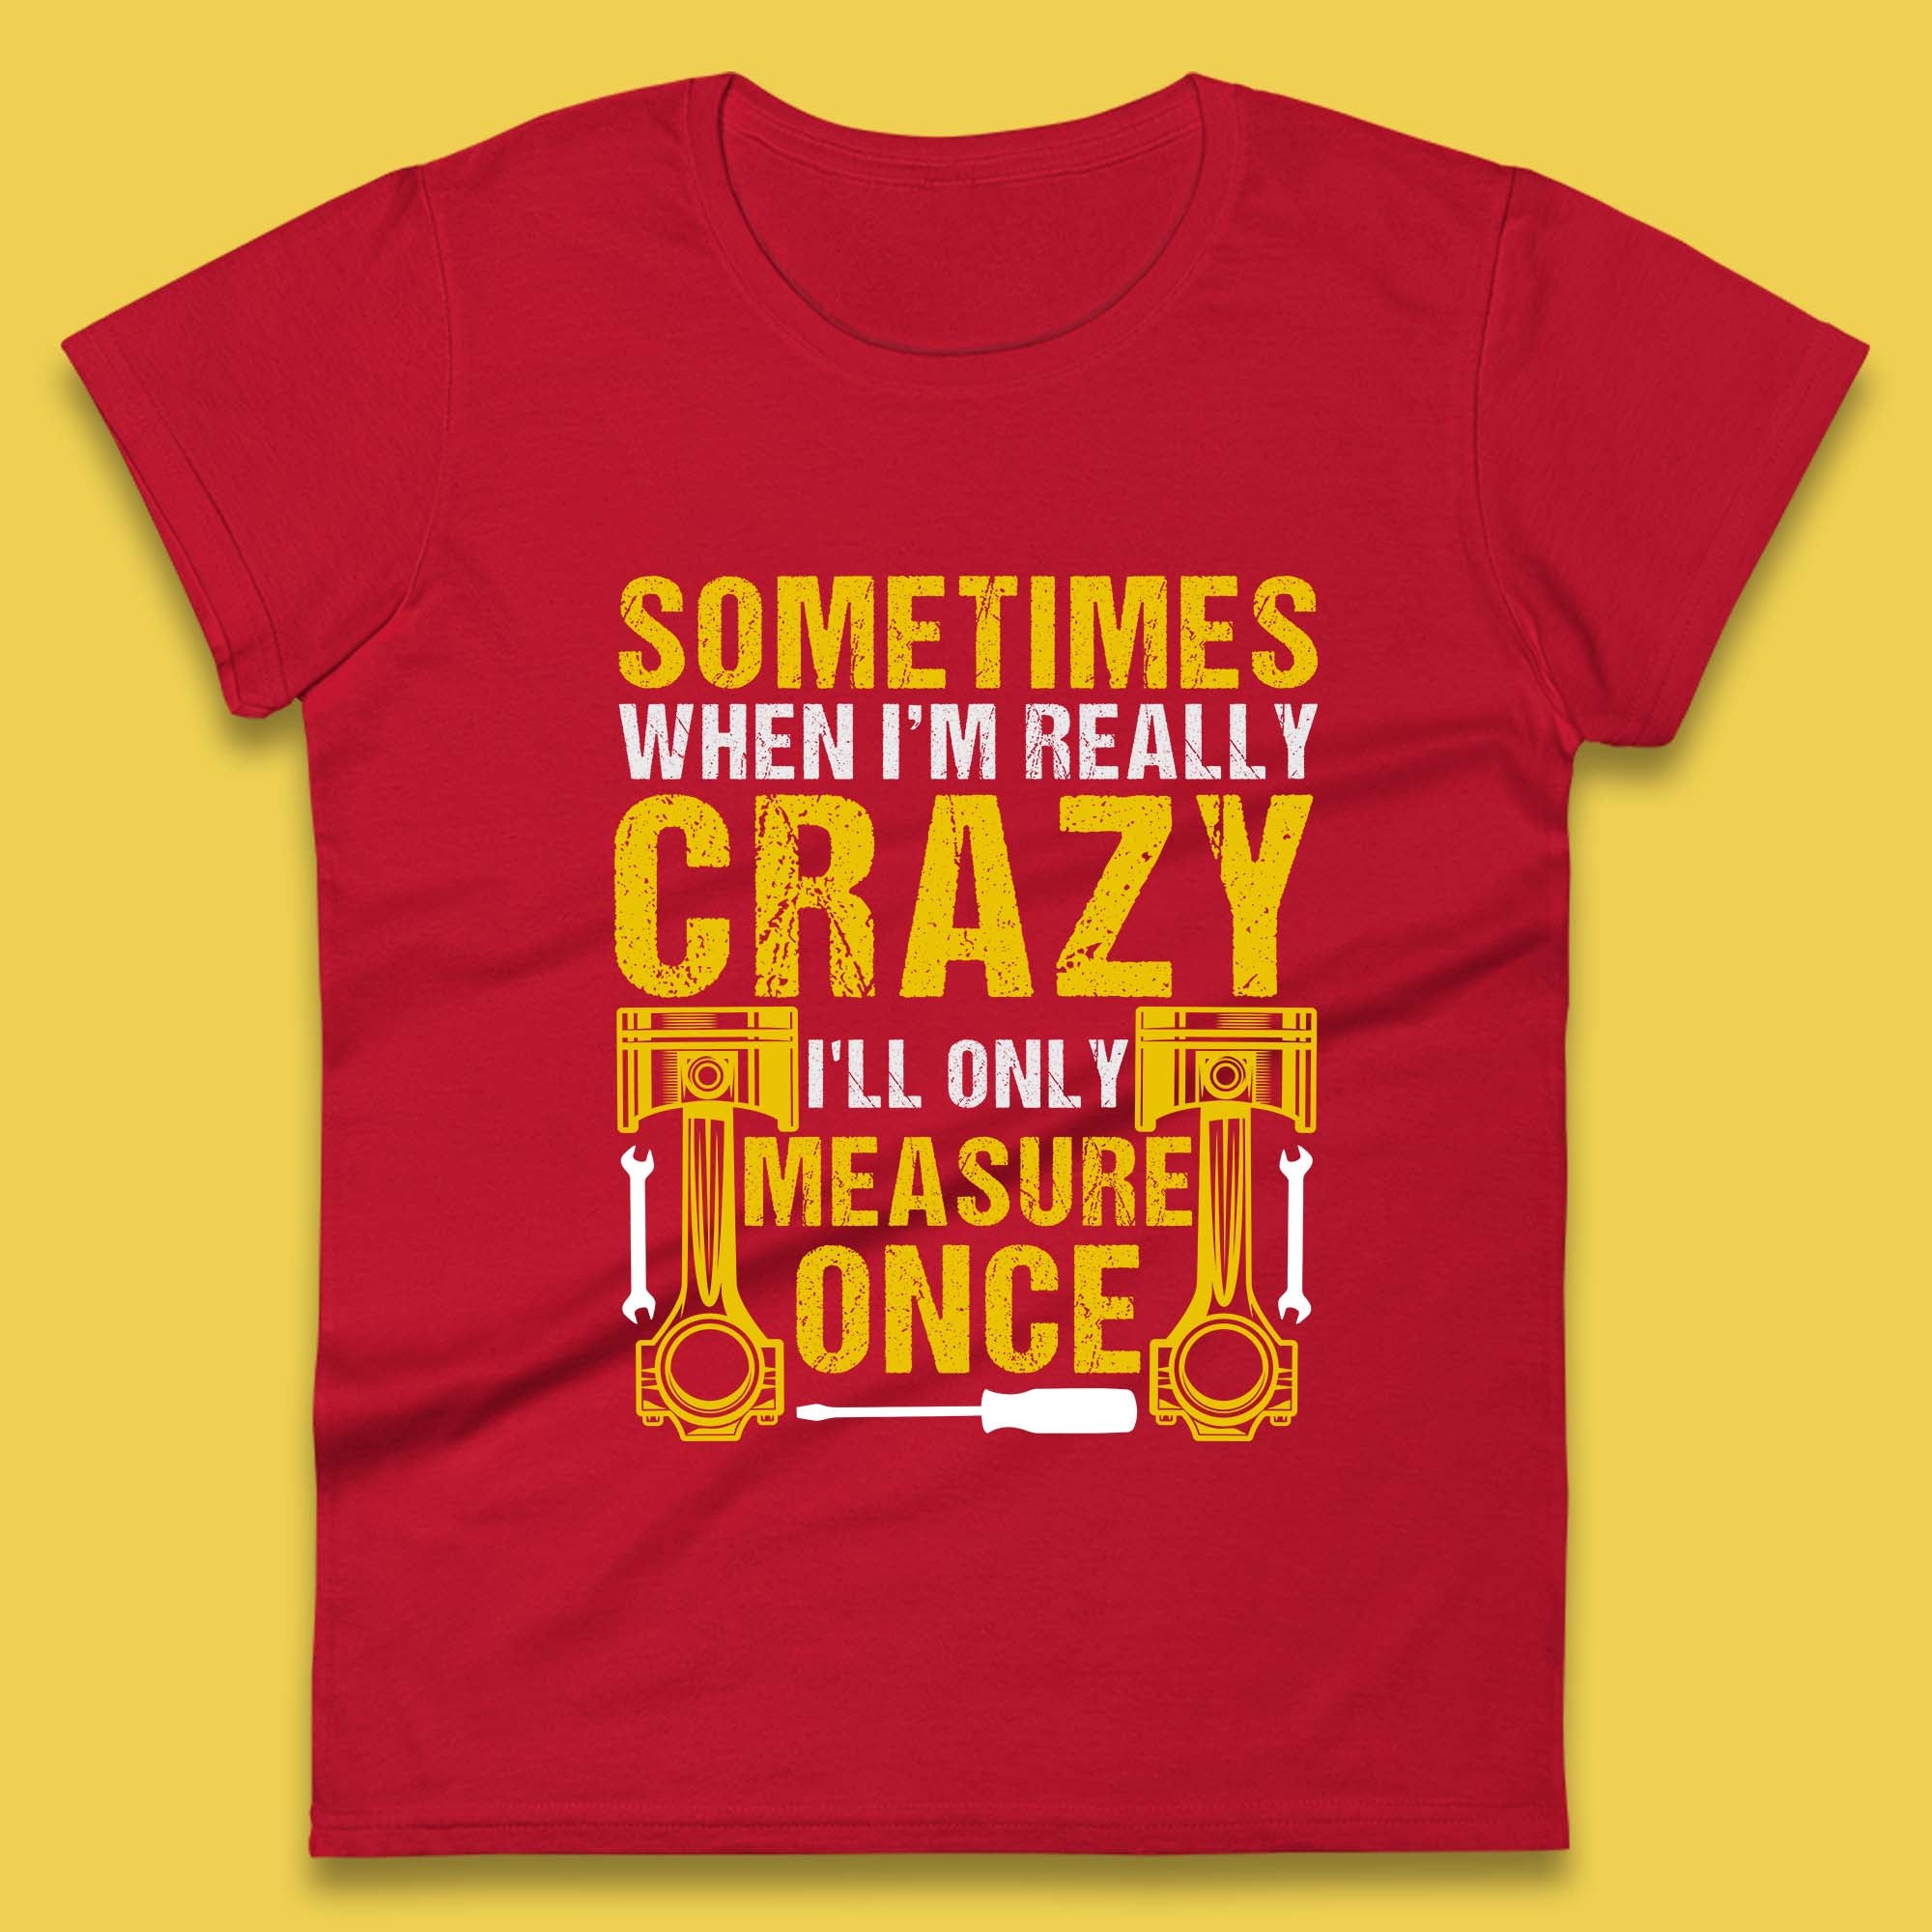 Sometimes When I'm Really Crazy I'll Only Measure Once Funny Handyman Gift Womens Tee Top